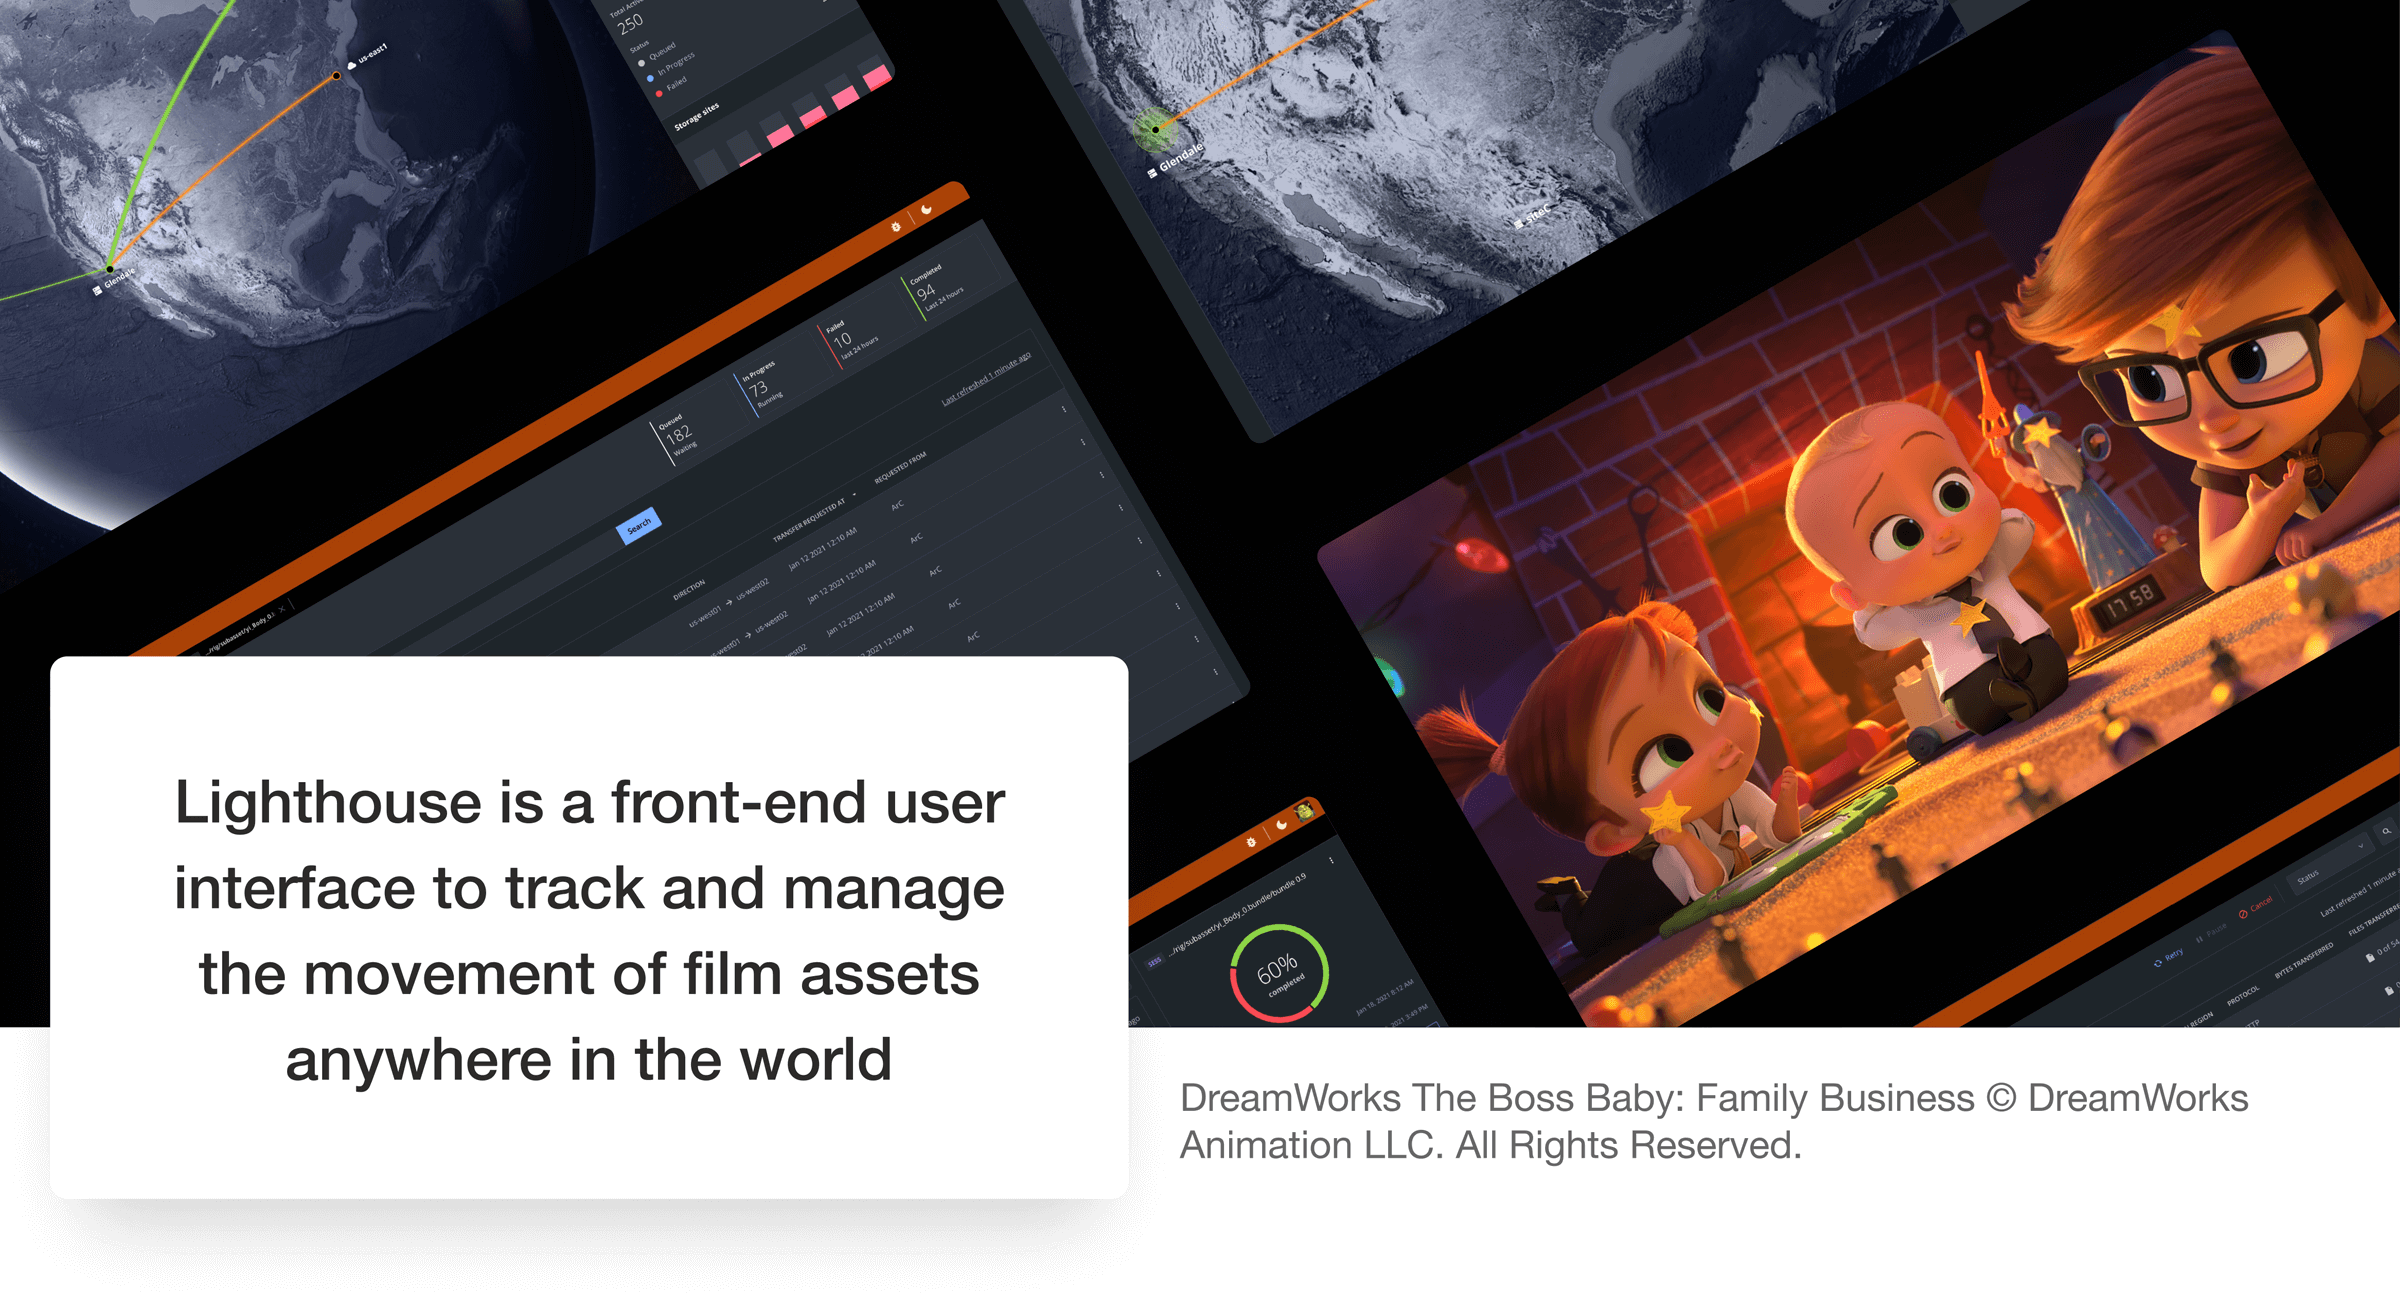 A message reads "Lighthouse is a front-end user interface to track and manage the movement of film assets anywhere in the world" layered over an array of screen designs